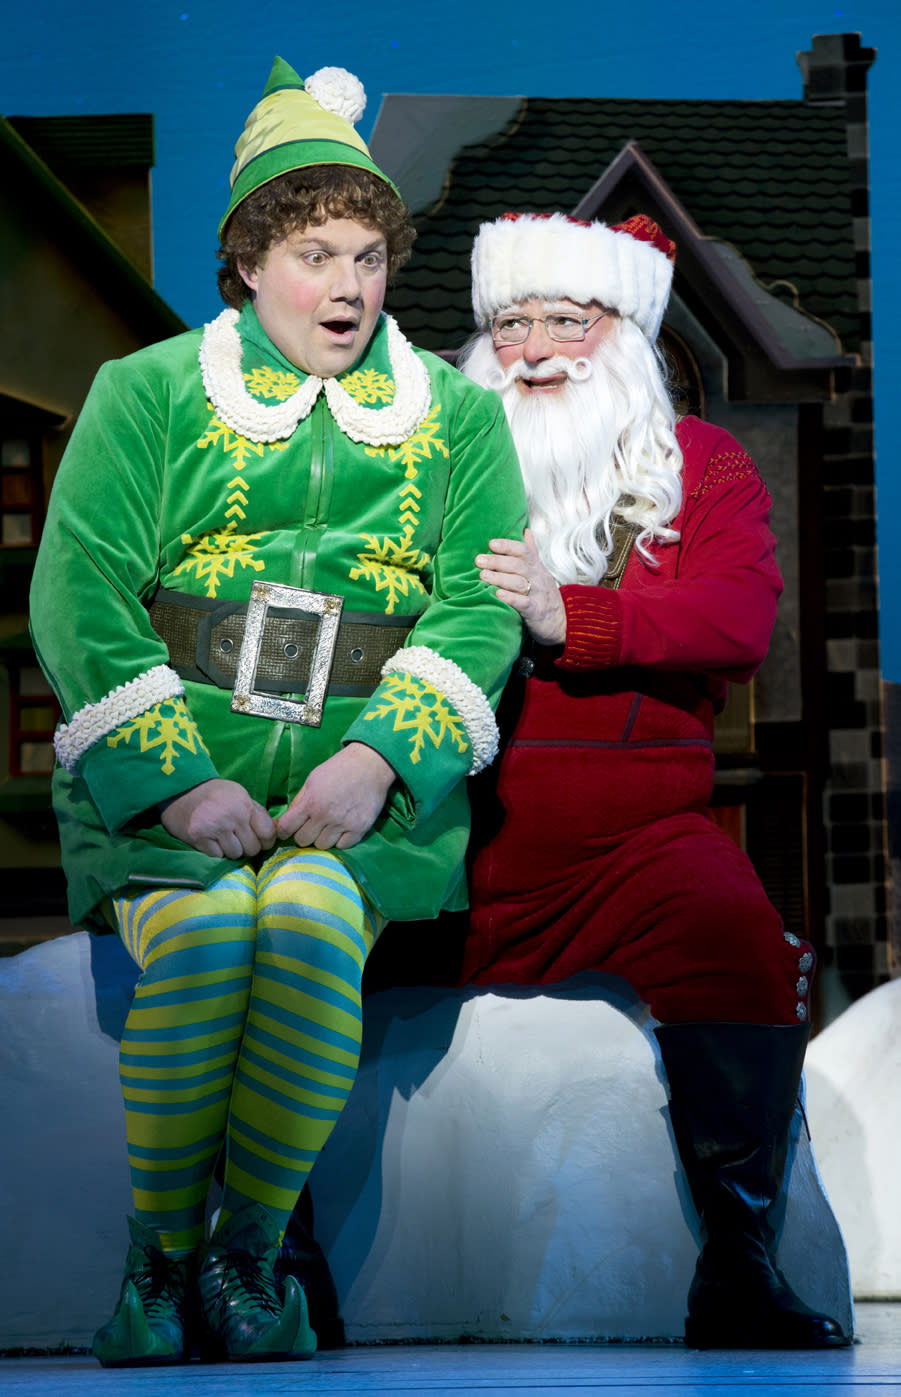 This undated publicity photo provided by The Hartman Group shows Wayne Knight, right, as Santa and Jordan Gelber as Buddy, in a scene from "Elf" at the Al Hirschfeld Theatre in New York. (AP Photo/The Hartman Group, Joan Marcus)